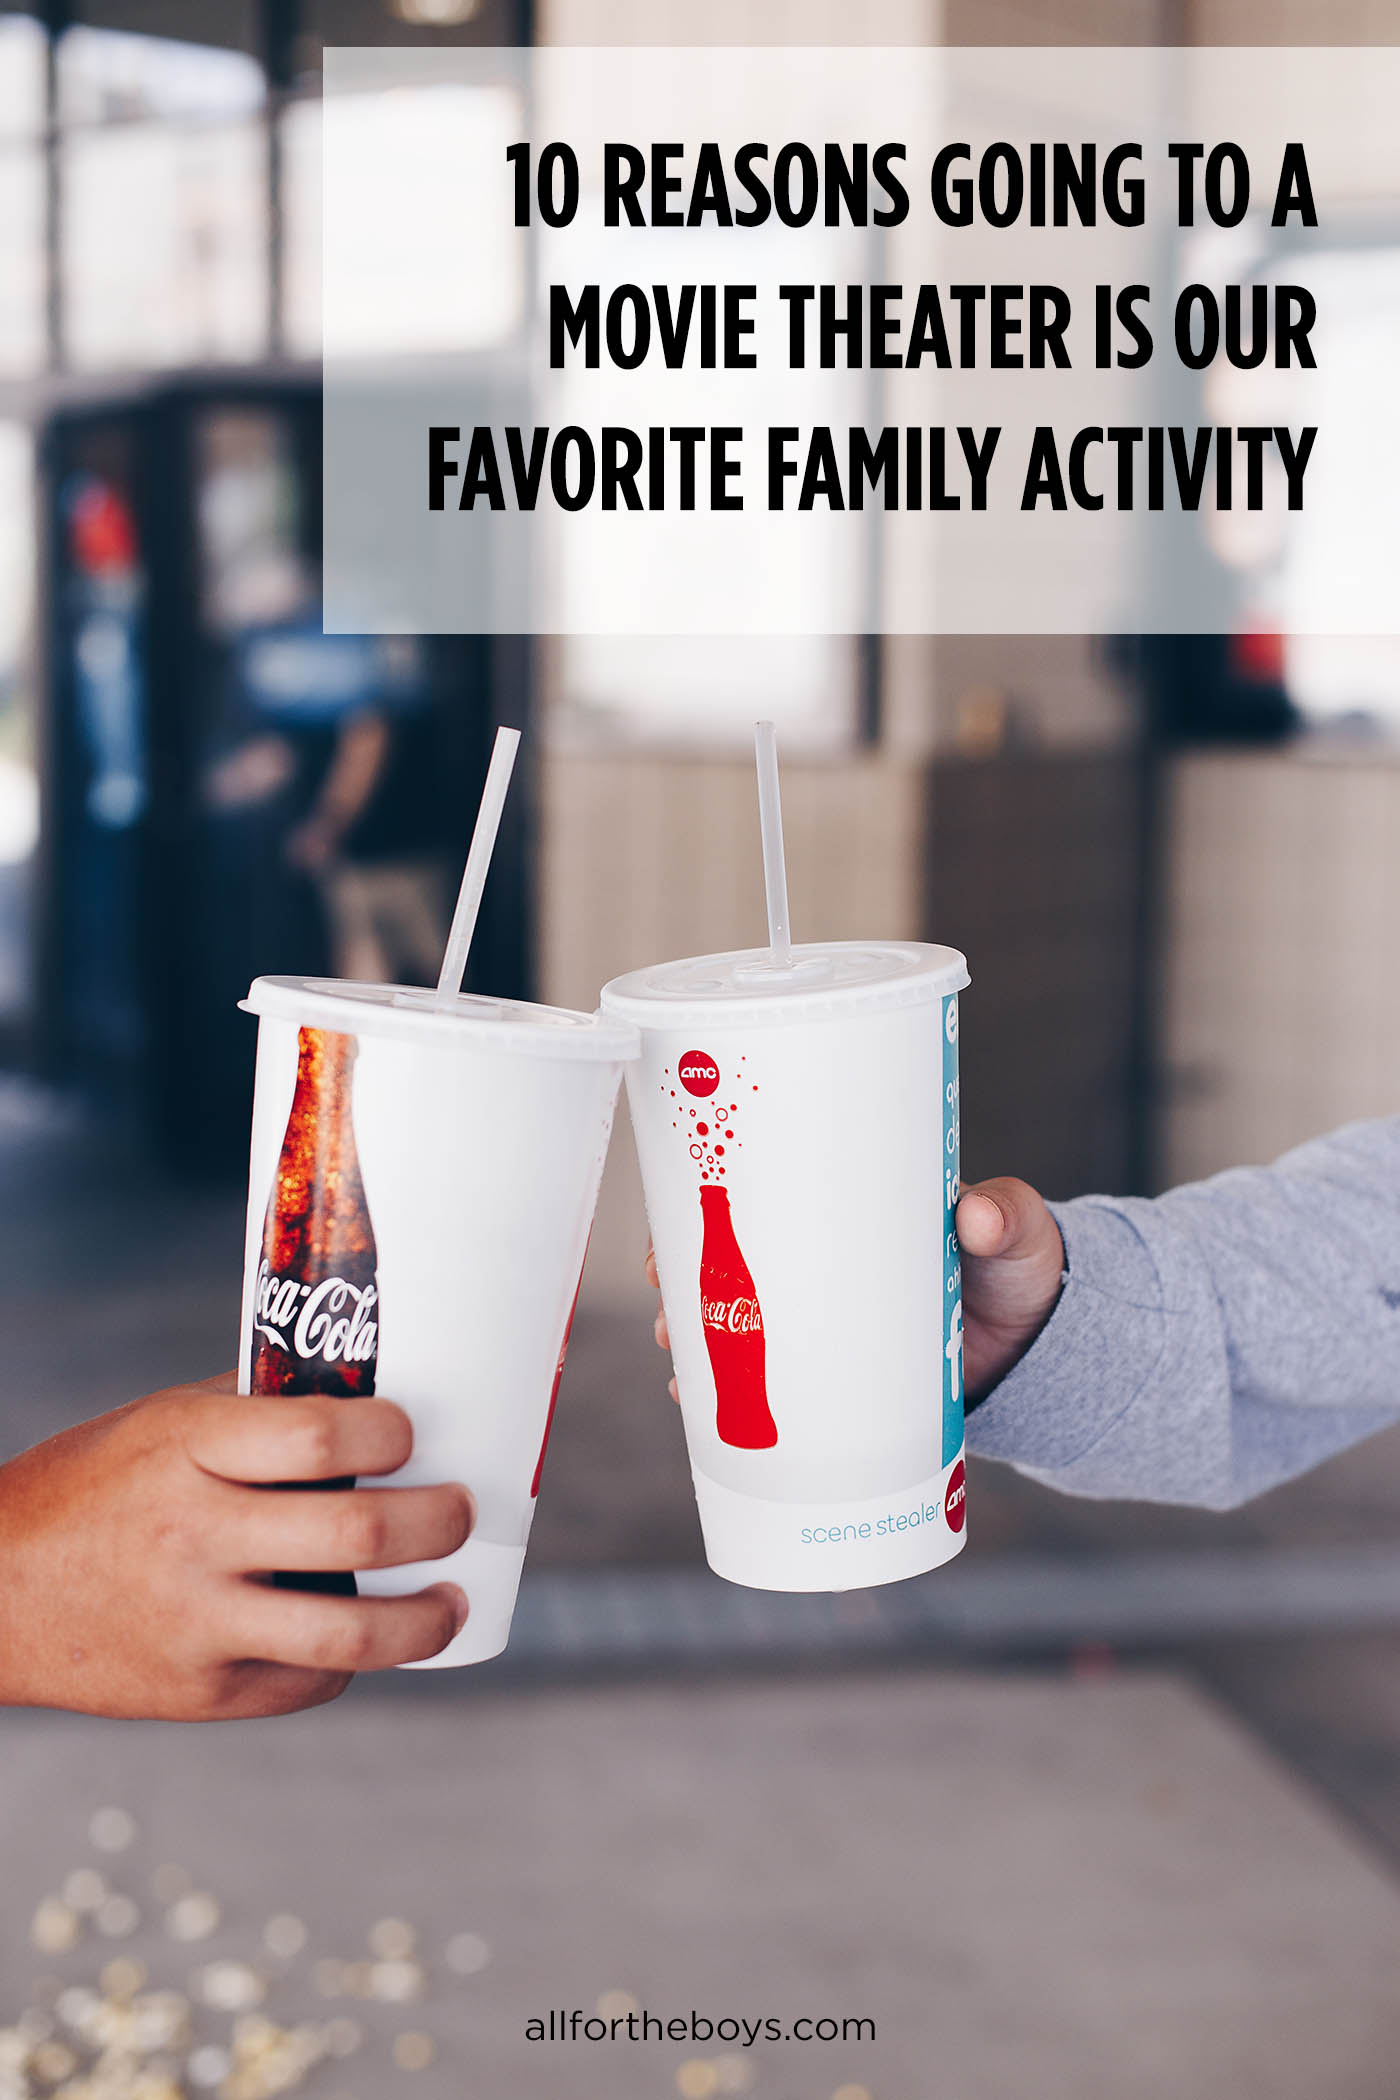 10 reasons going to a movie theater is our favorite family activity